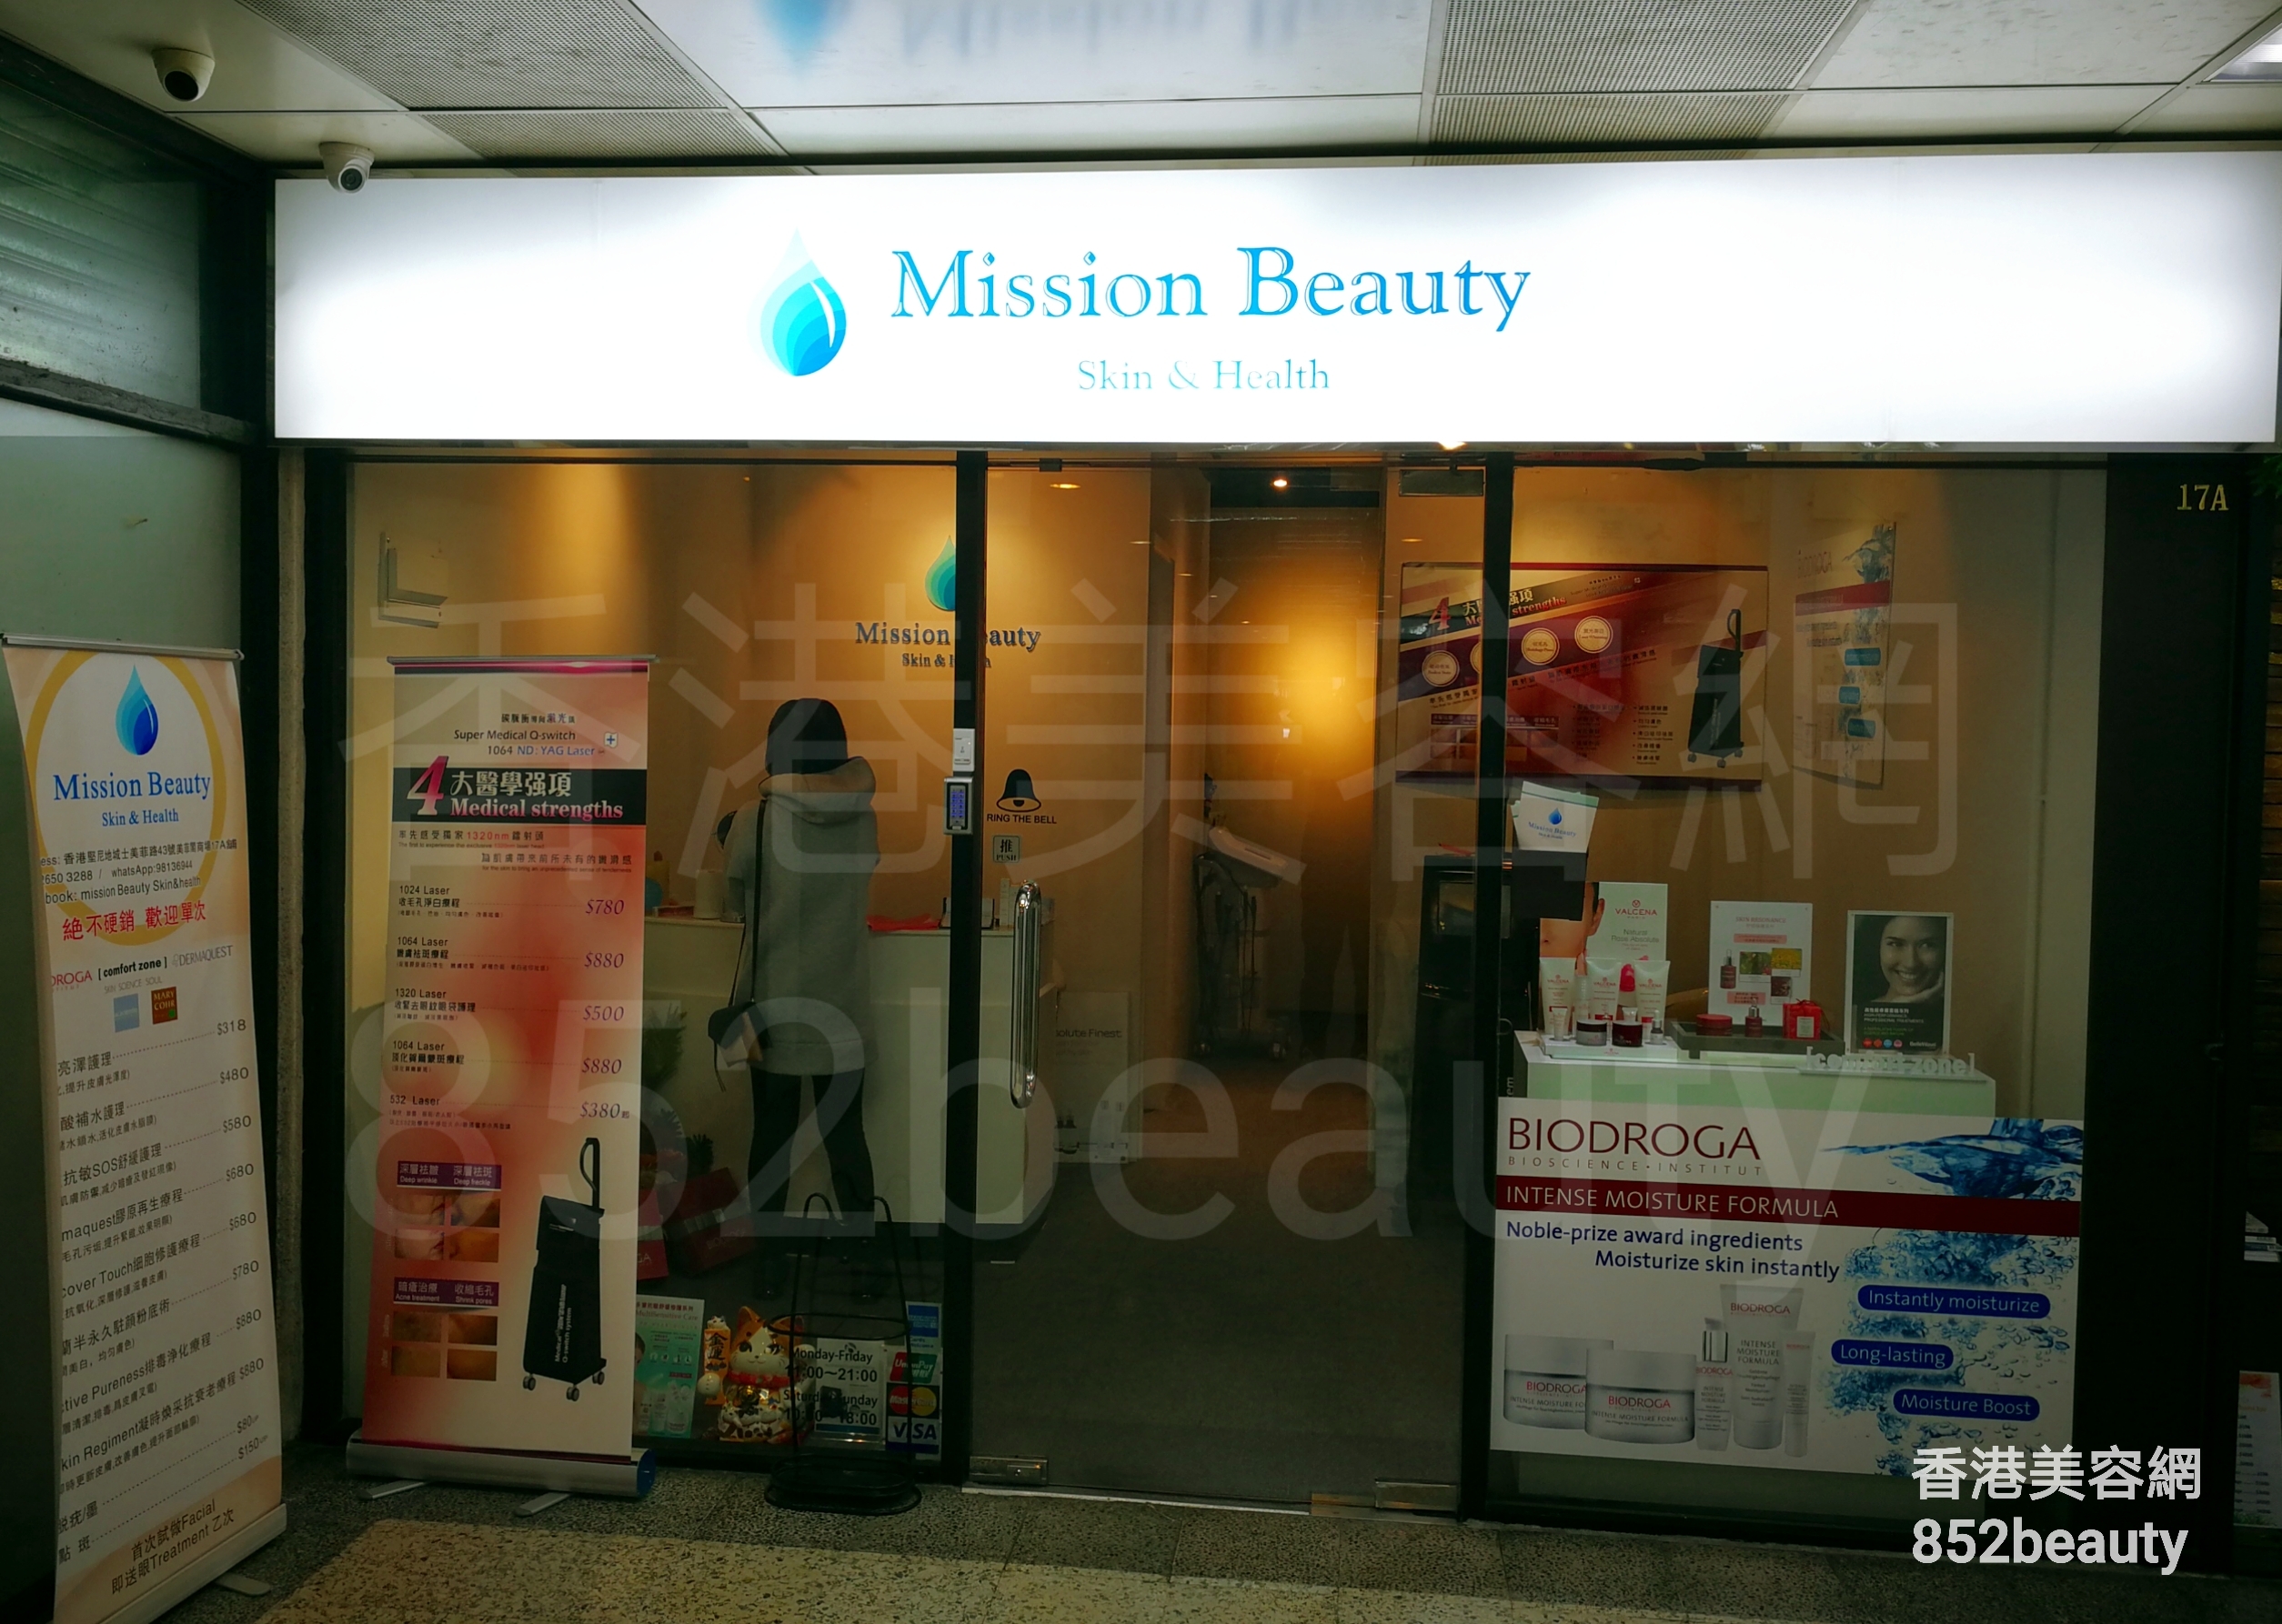 Facial Care: Mission Beauty